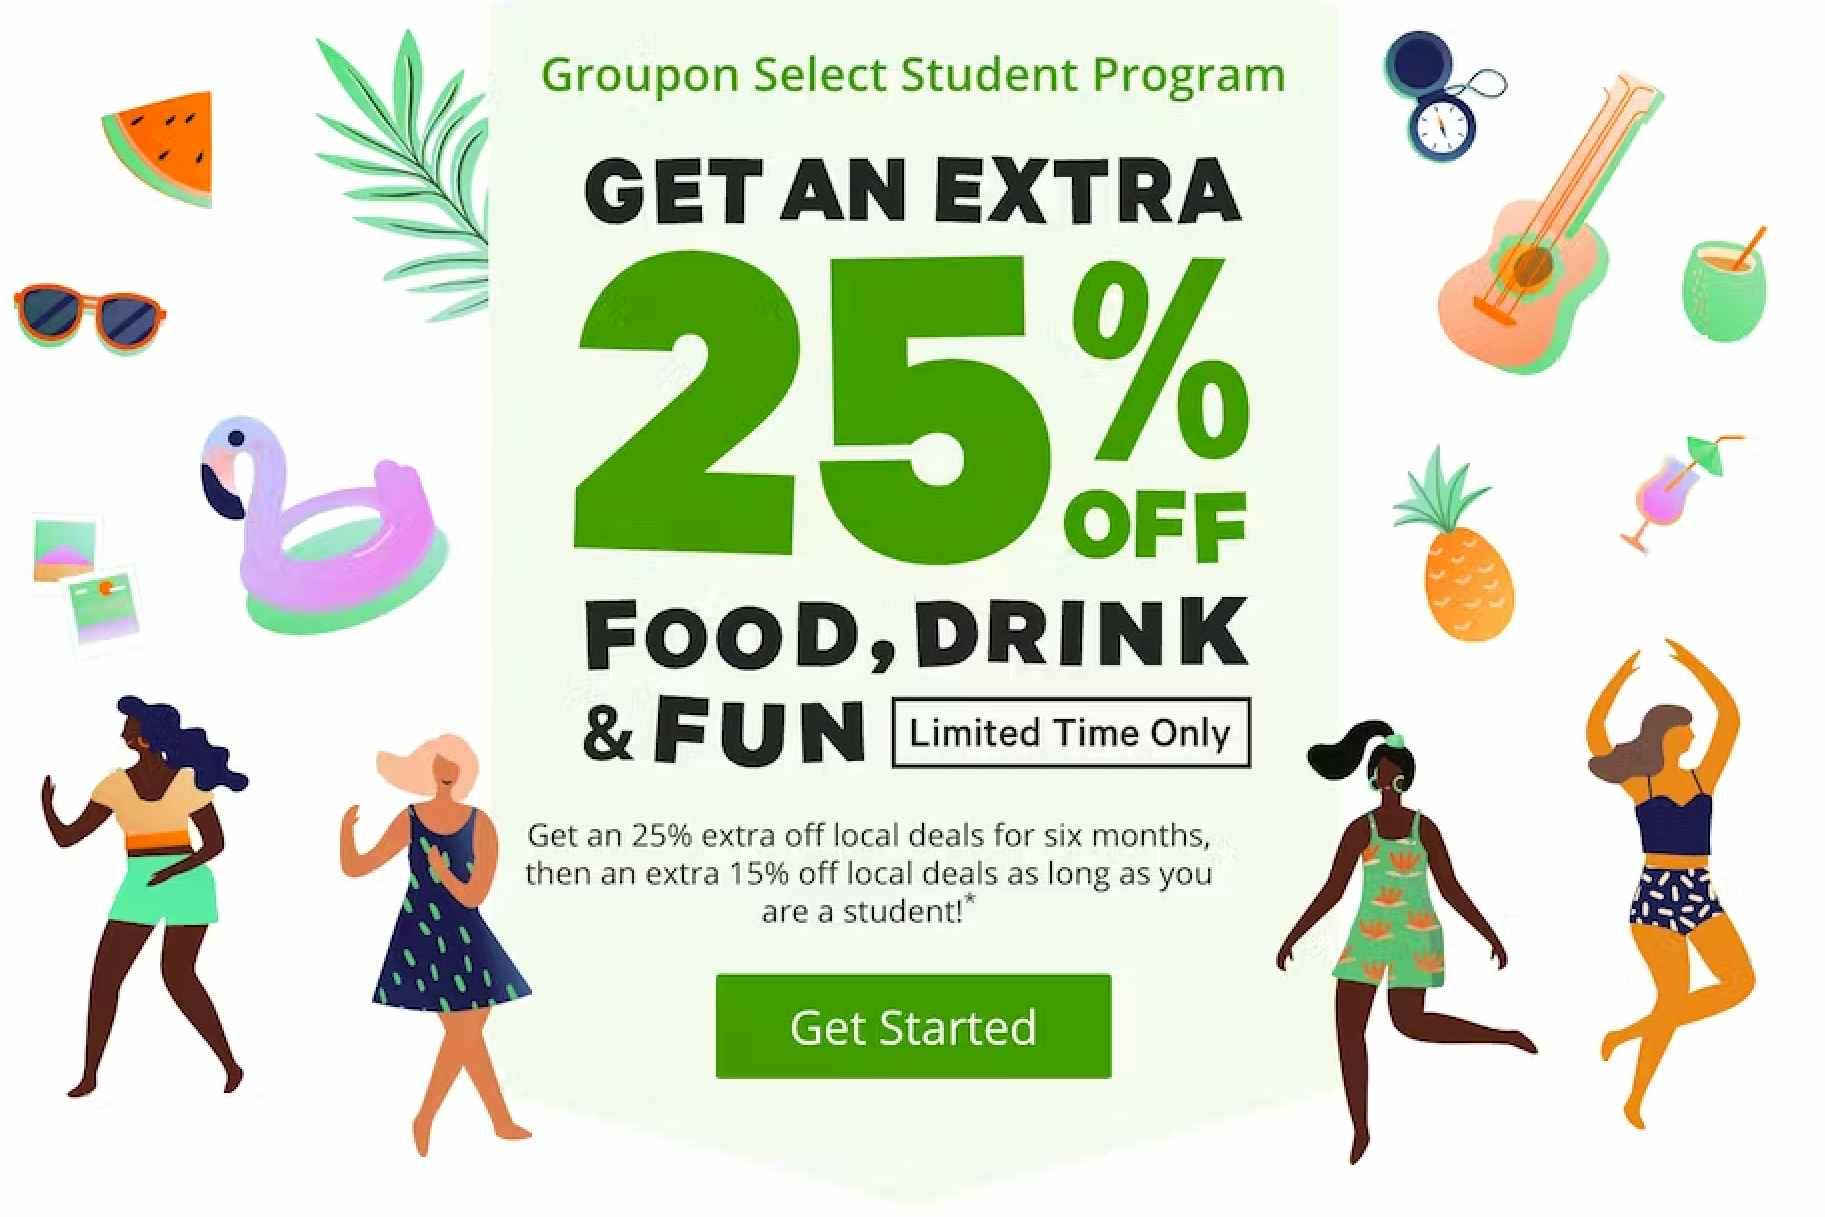 Groupon student discount for 25% off local deals